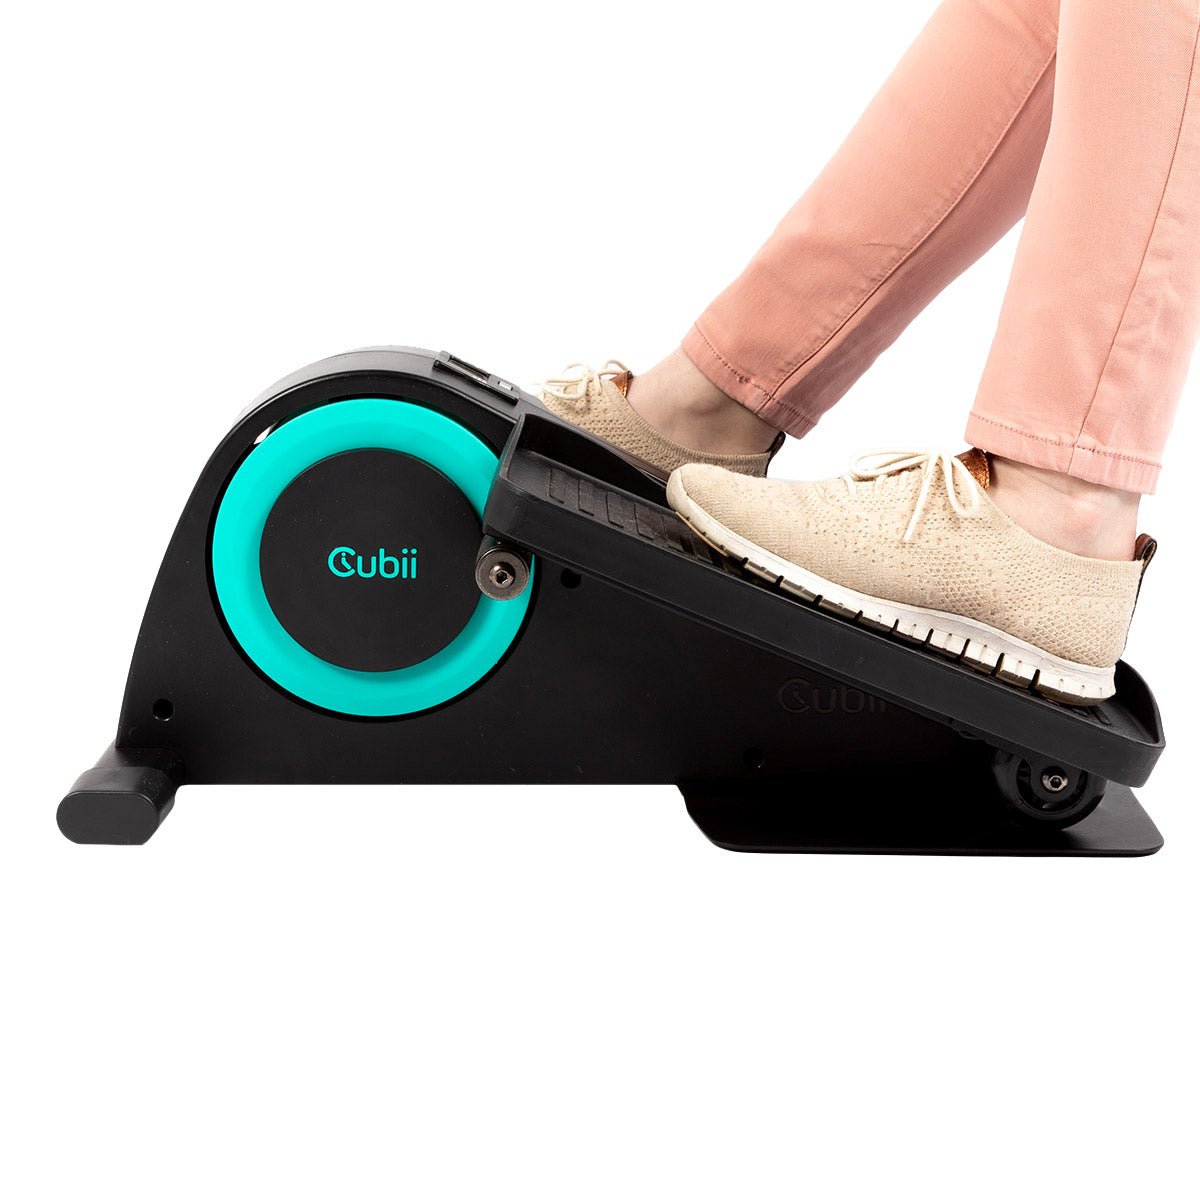 Cubii Jr. Seated Elliptical with Built-In Display Monitor - Alpine Outlets